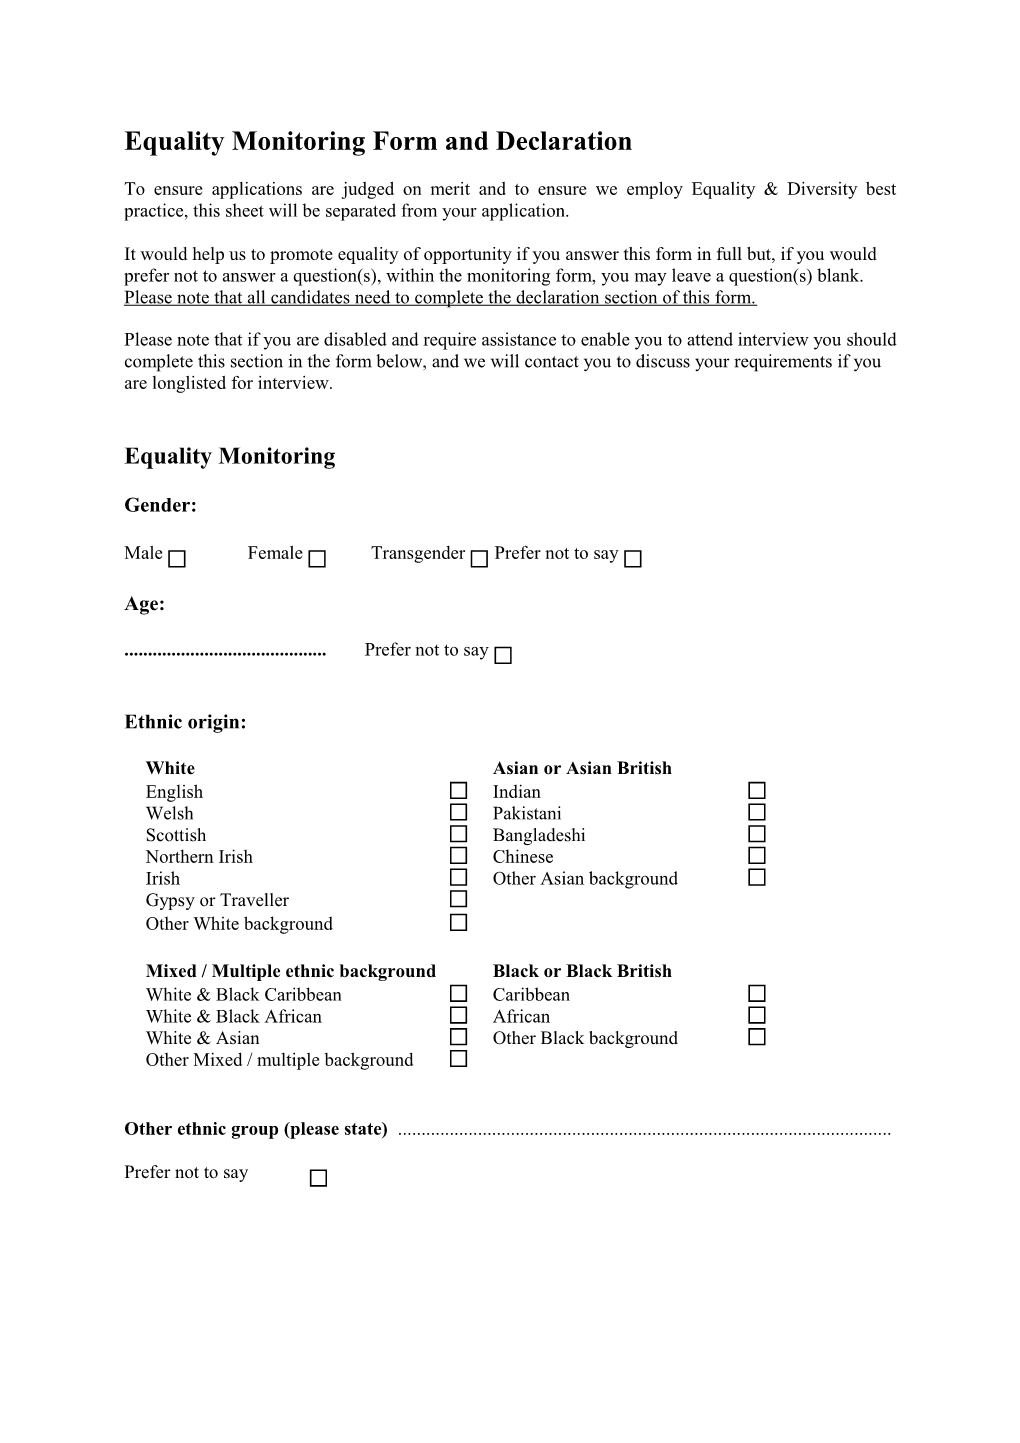 Equality Monitoring Form and Declaration